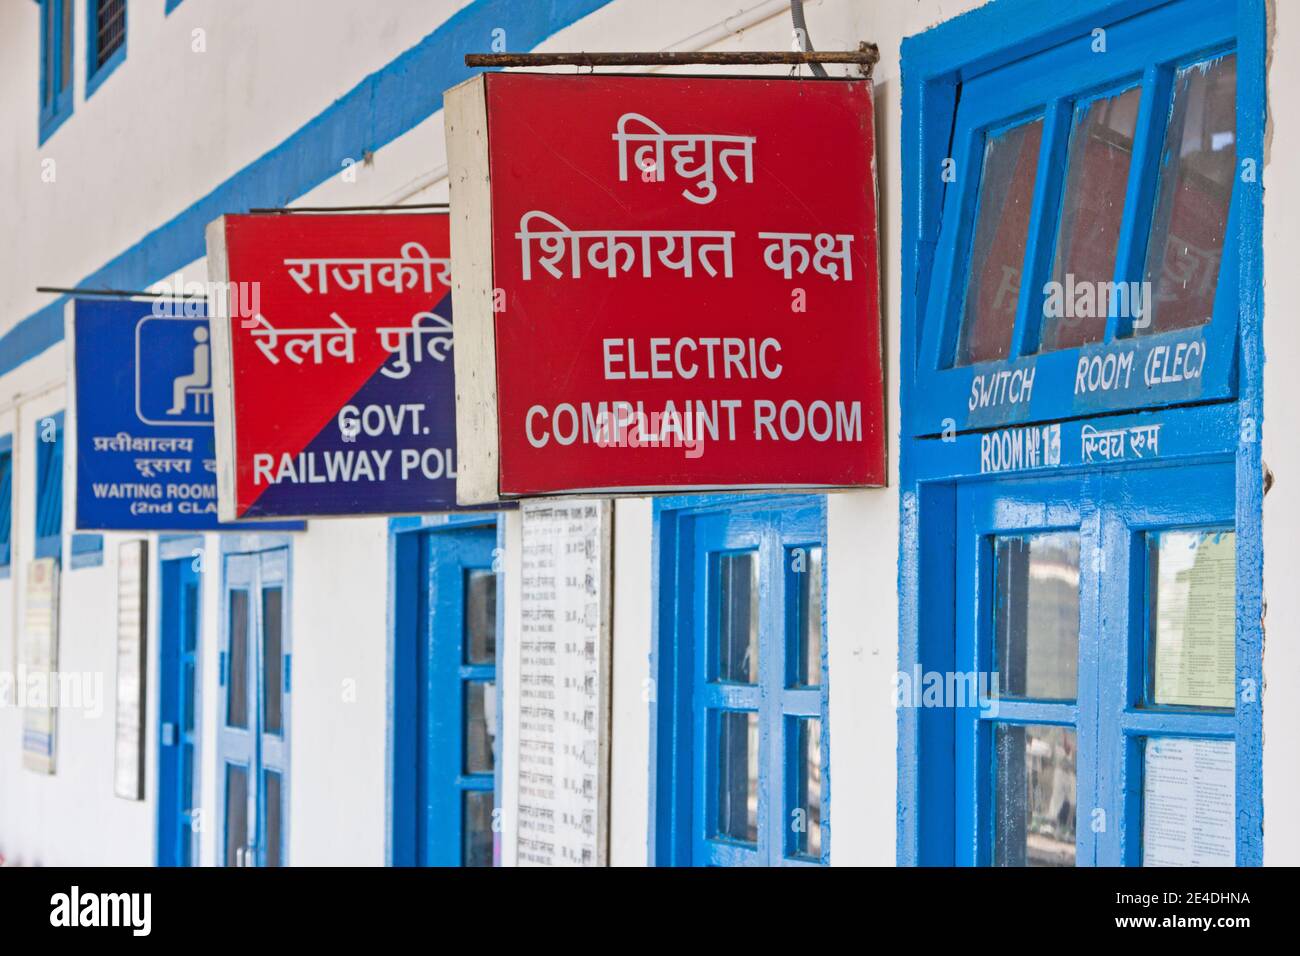 Signage in the Hindi and English language at an Indian railway station Stock Photo